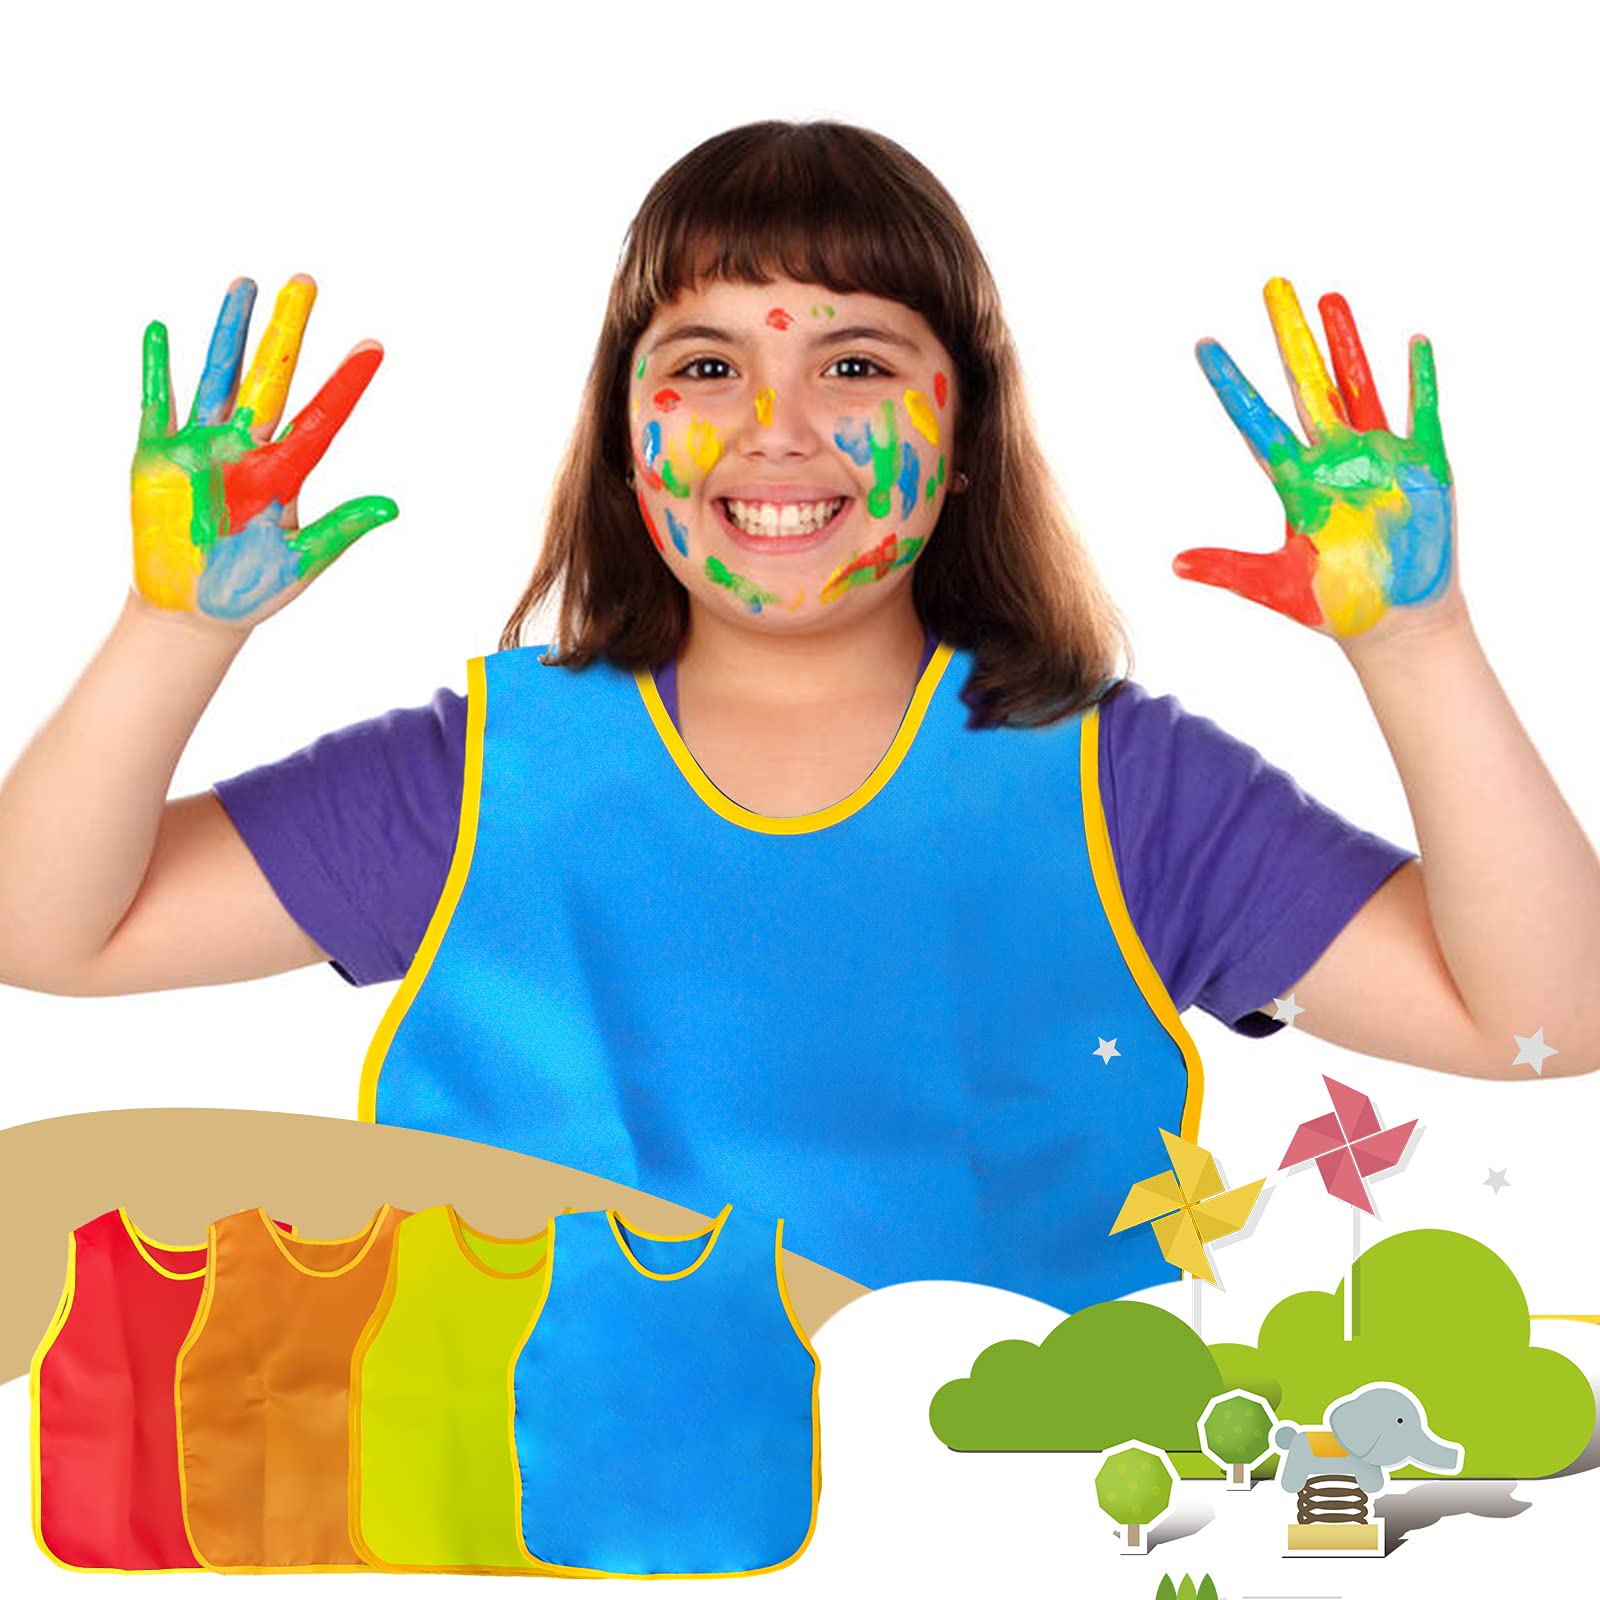 NANASO 4Pack Smock for Kids,Children Waterproof Art Smock Painting Feeding, Kids Painting Apron Handwork, Cooking, Toddler Paint Smock for Age 2-6 Years Gifts